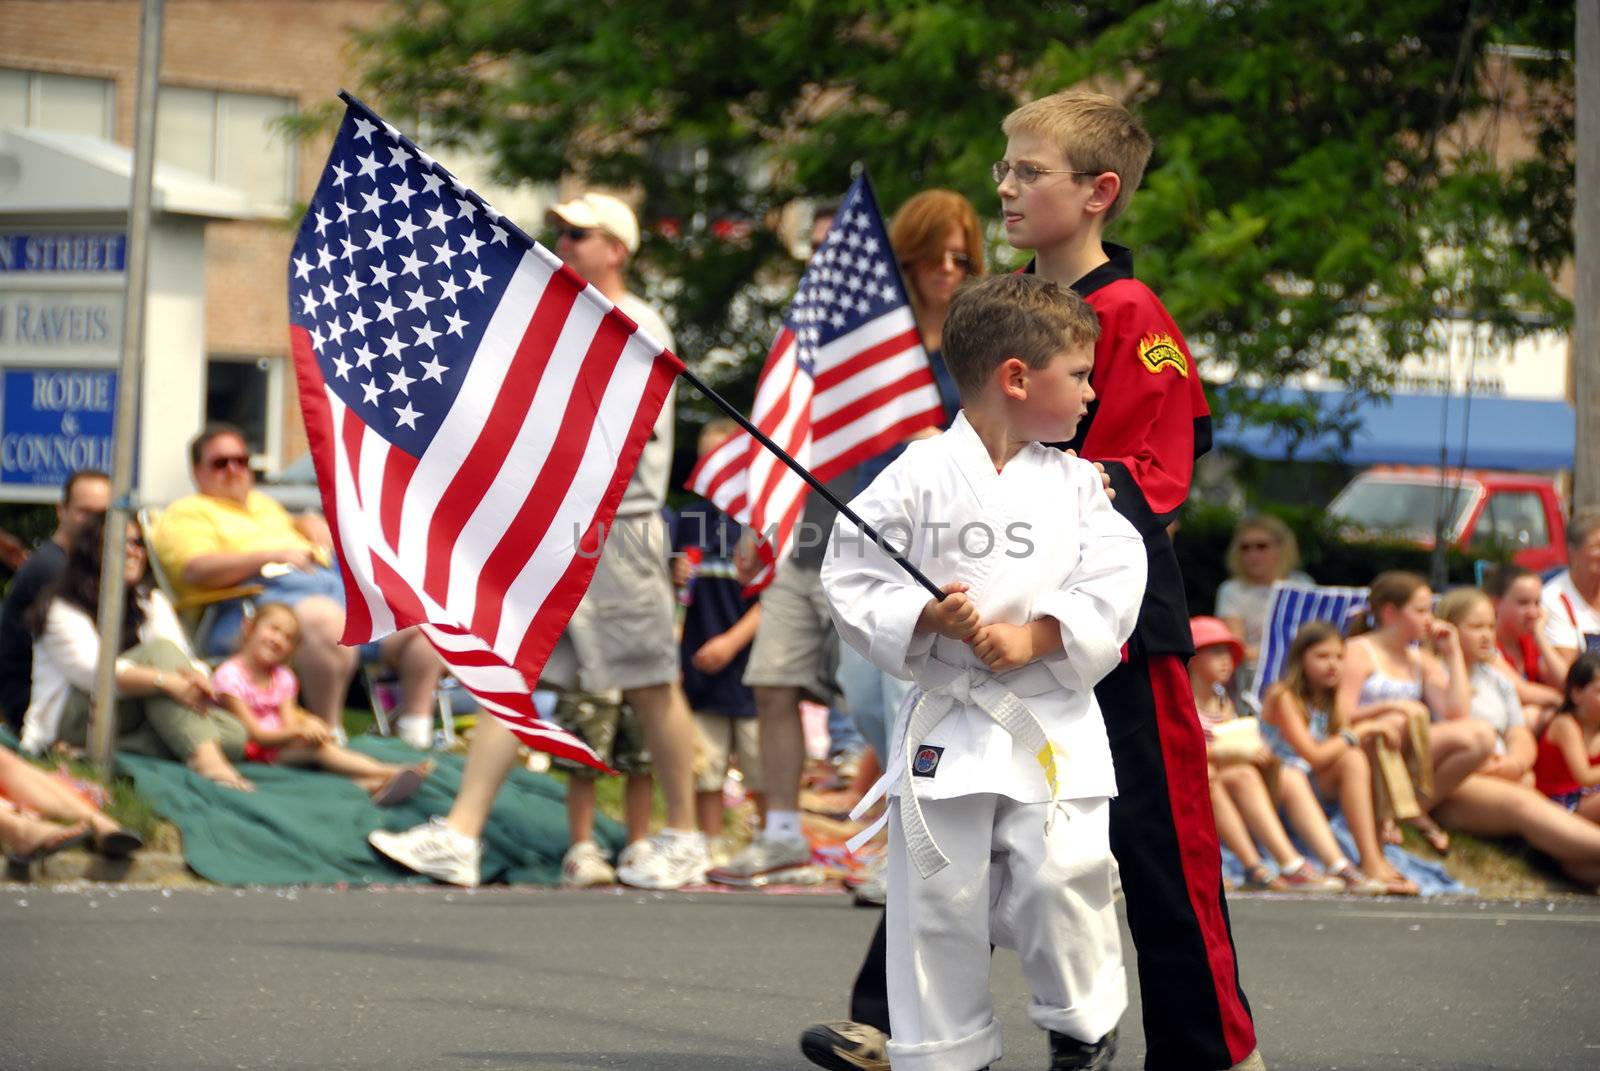 A group of kids walking in the memorial day parade